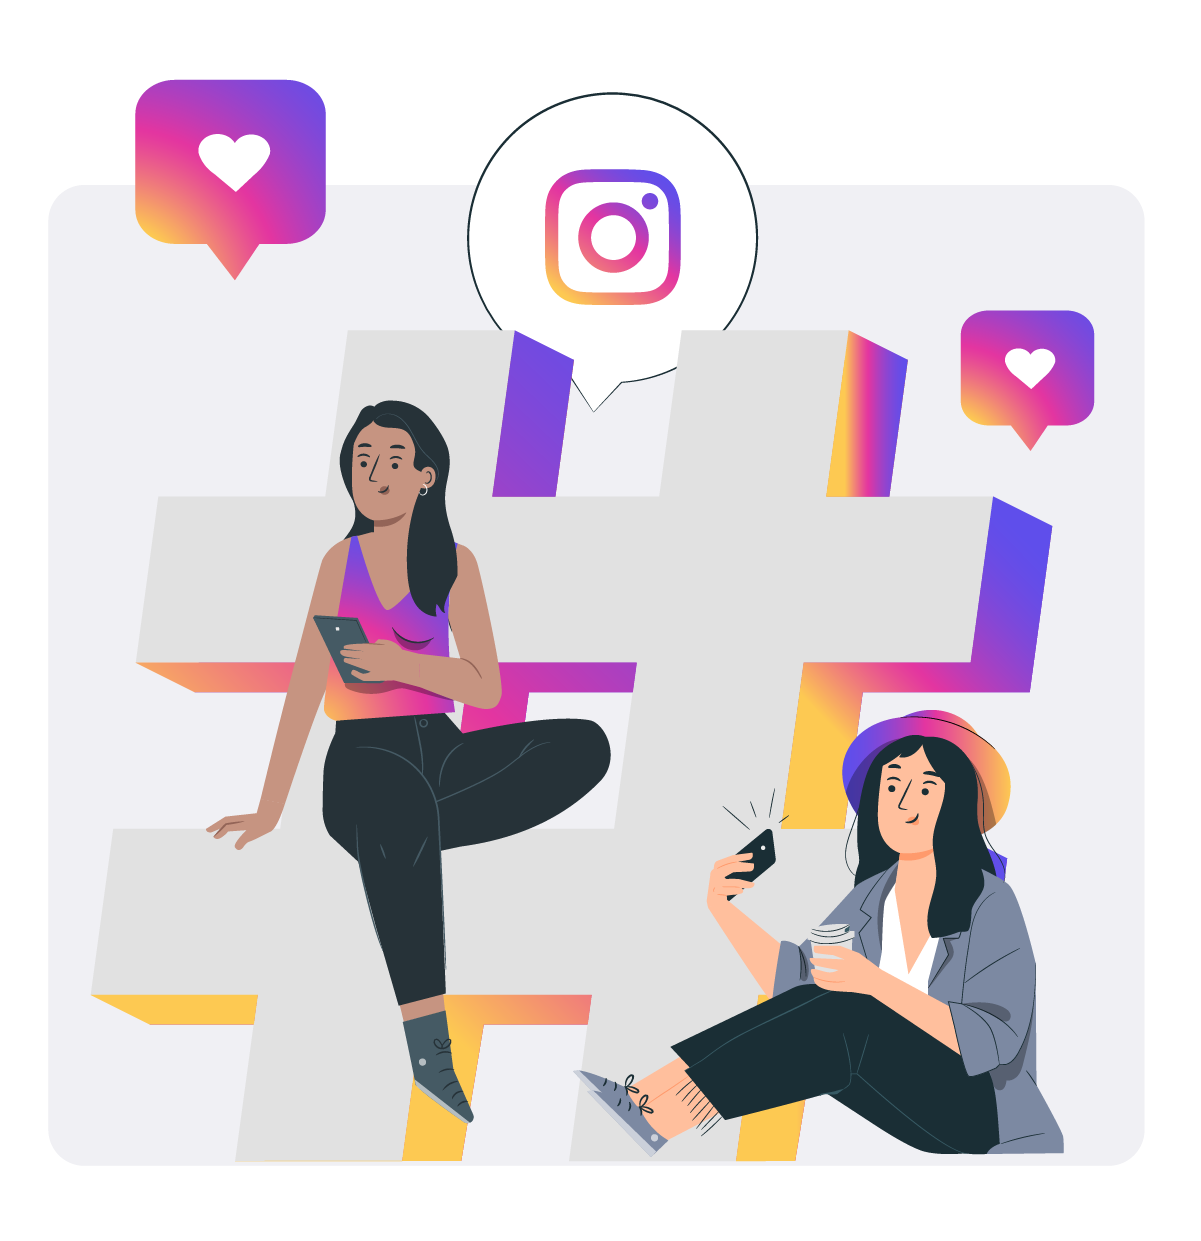 Two women sitting on a hashtag with the Instagram logo in the background.